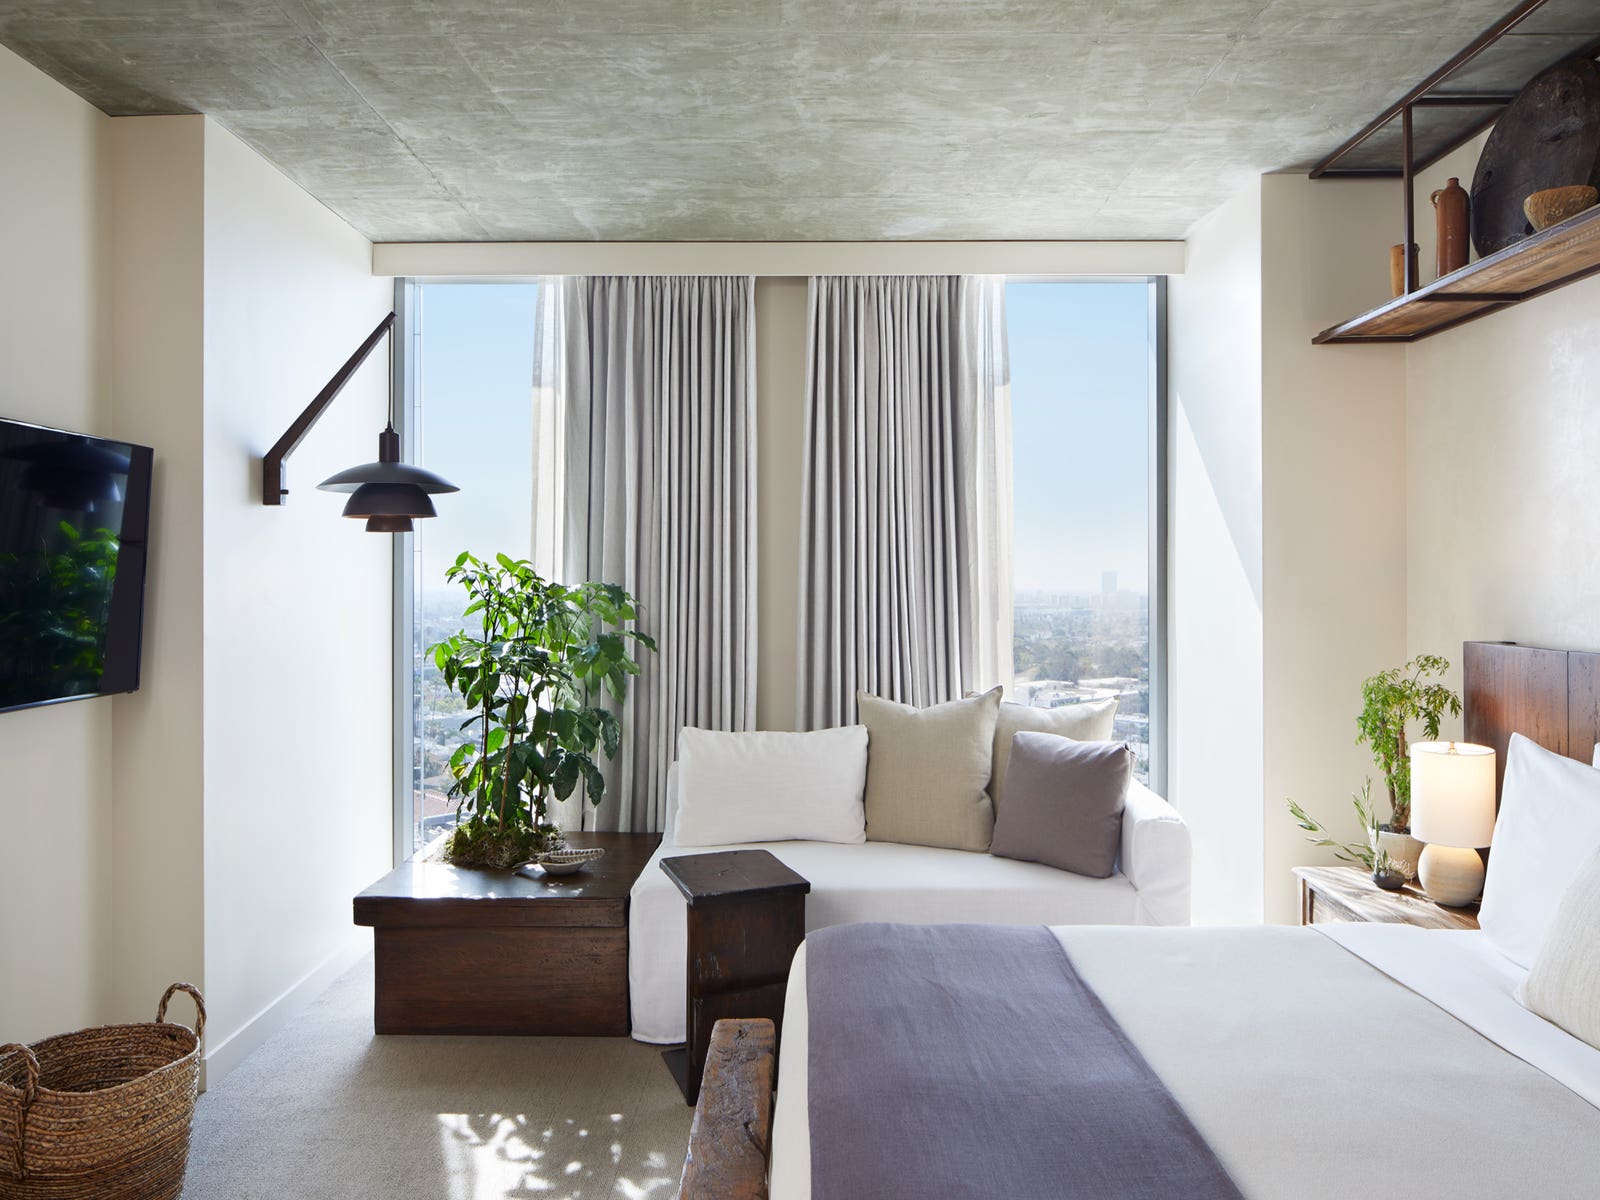 1 Hotel West Hollywood | Discover Los Angeles